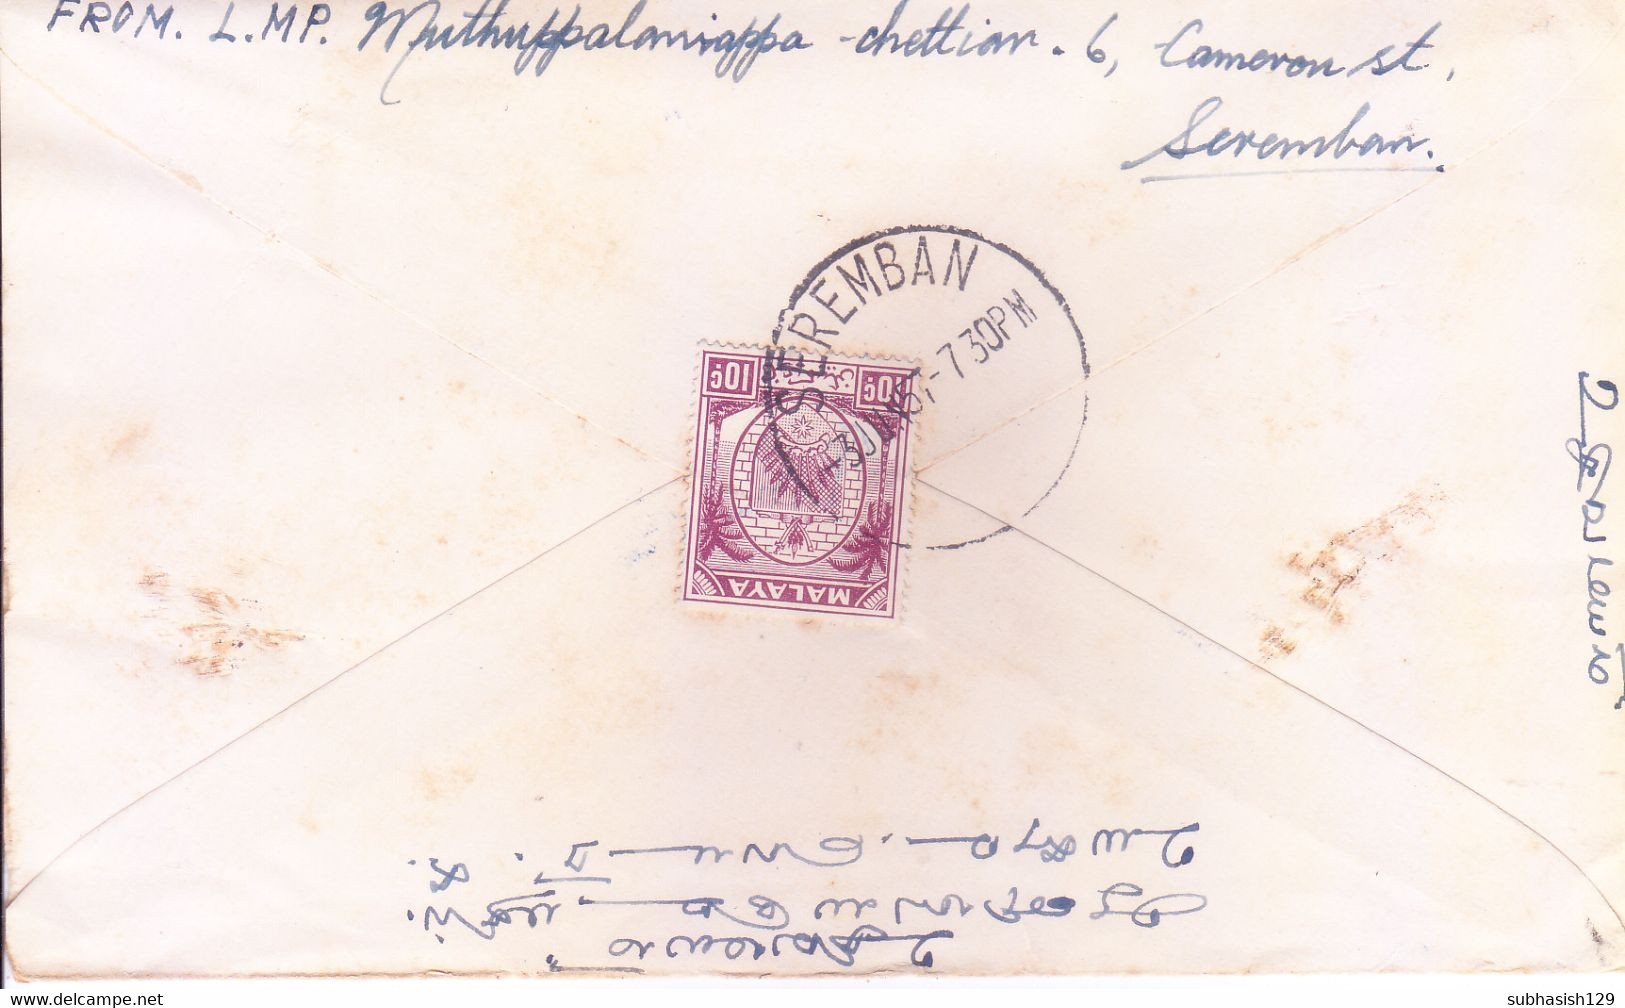 MALAYA SEREMBAN : USED COVER : YEAR 1957 : POSTED FROM SERAMBAN FOR INDIA : USE OF 10 CENTSTAMPS - Negri Sembilan